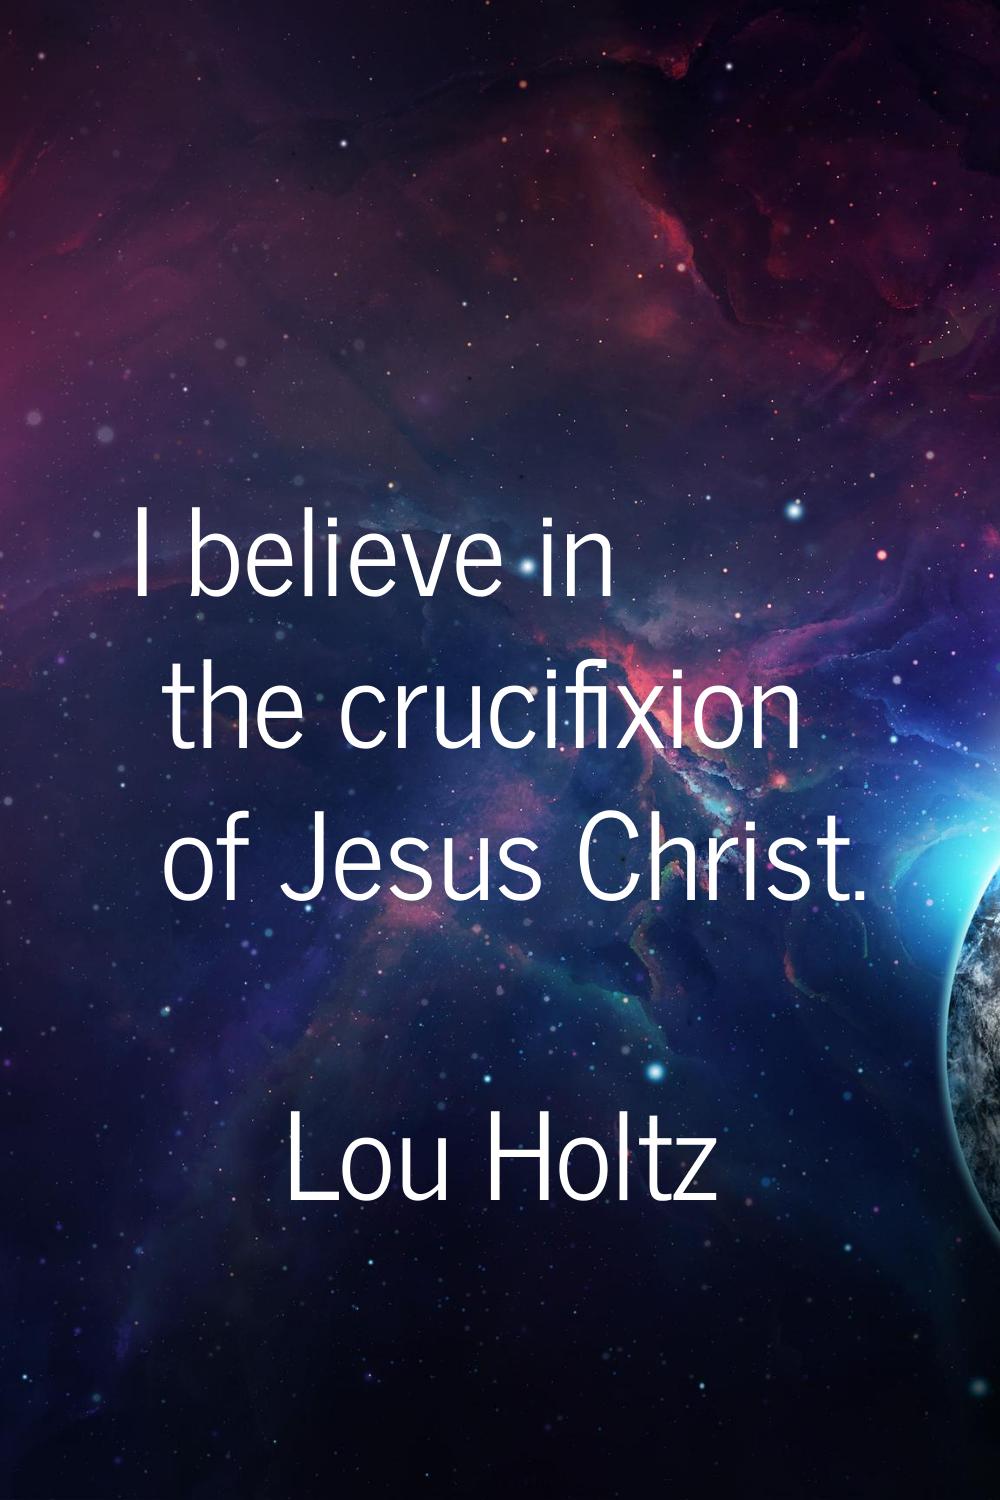 I believe in the crucifixion of Jesus Christ.